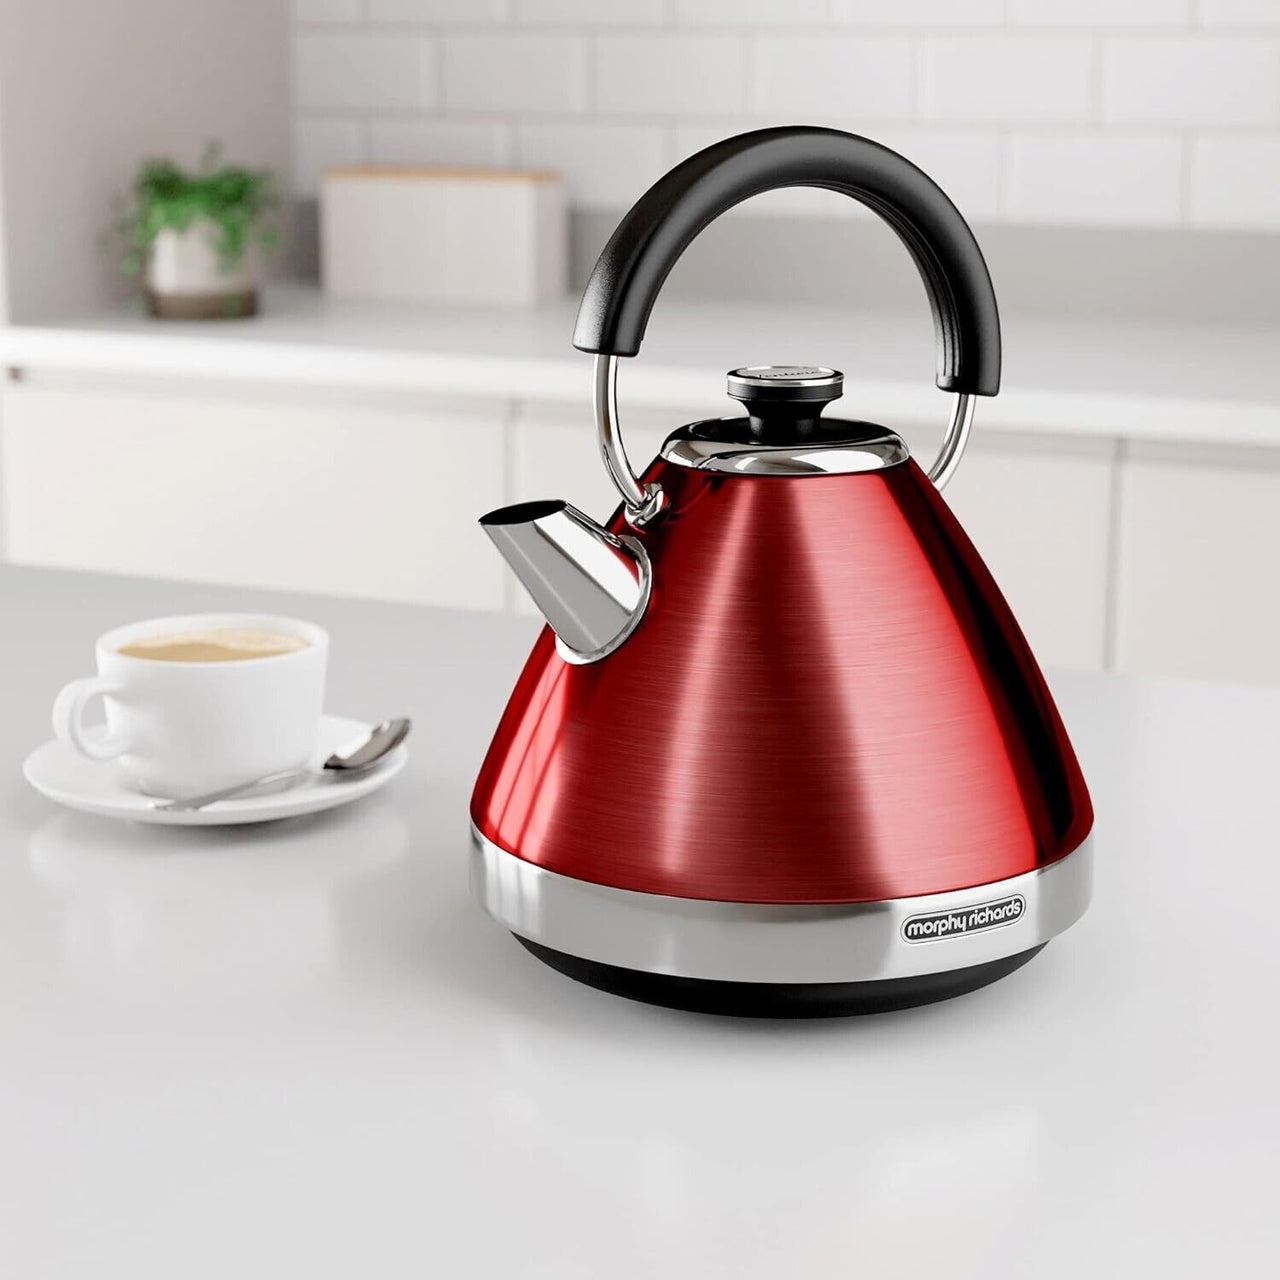 Morphy Richards Venture Red 1.5L 3KW Pyramid Kettle 100133